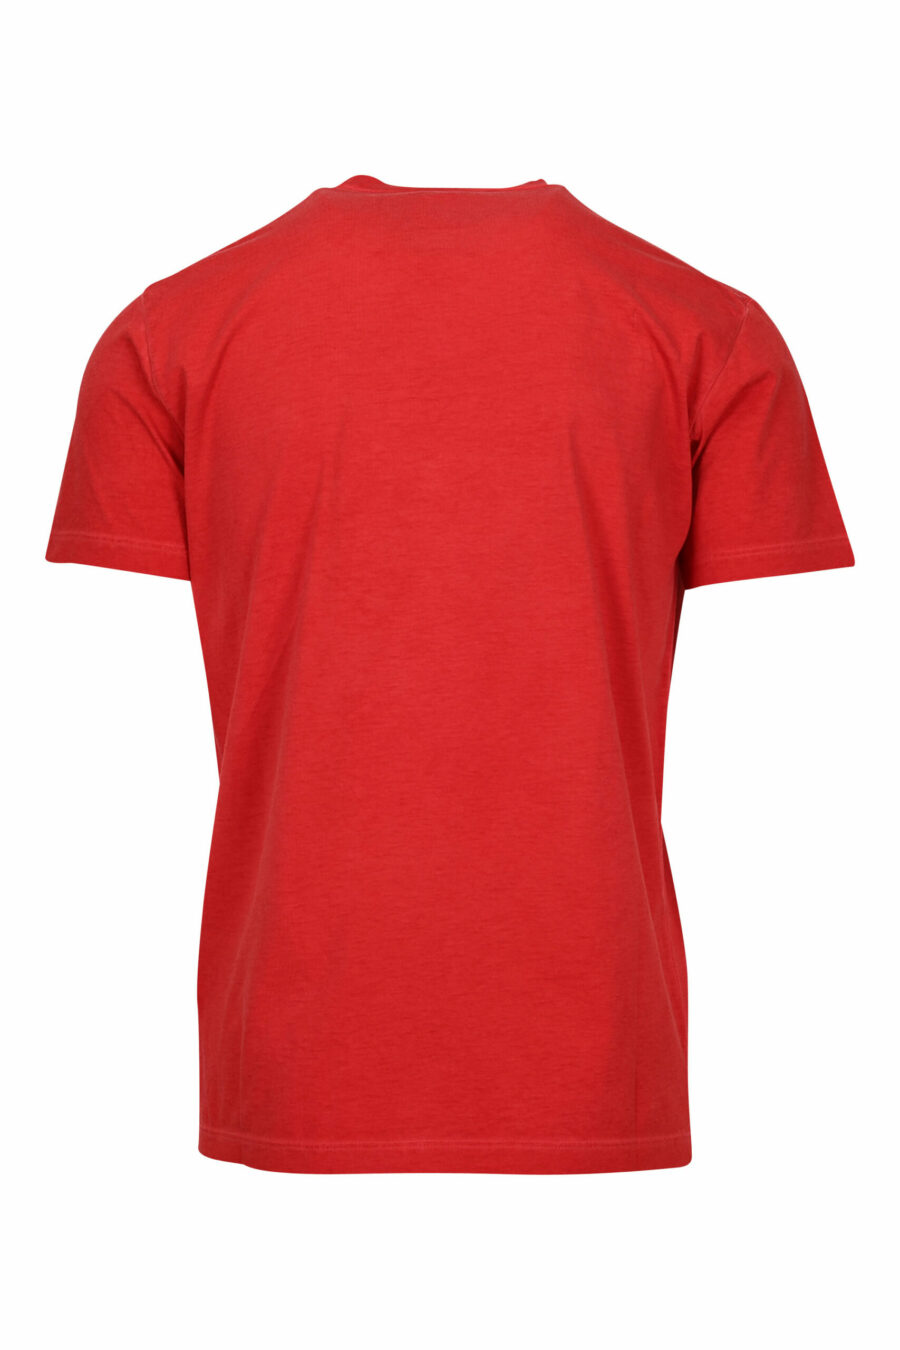 Red T-shirt with "vip" maxilogo - 8054148578923 1 scaled